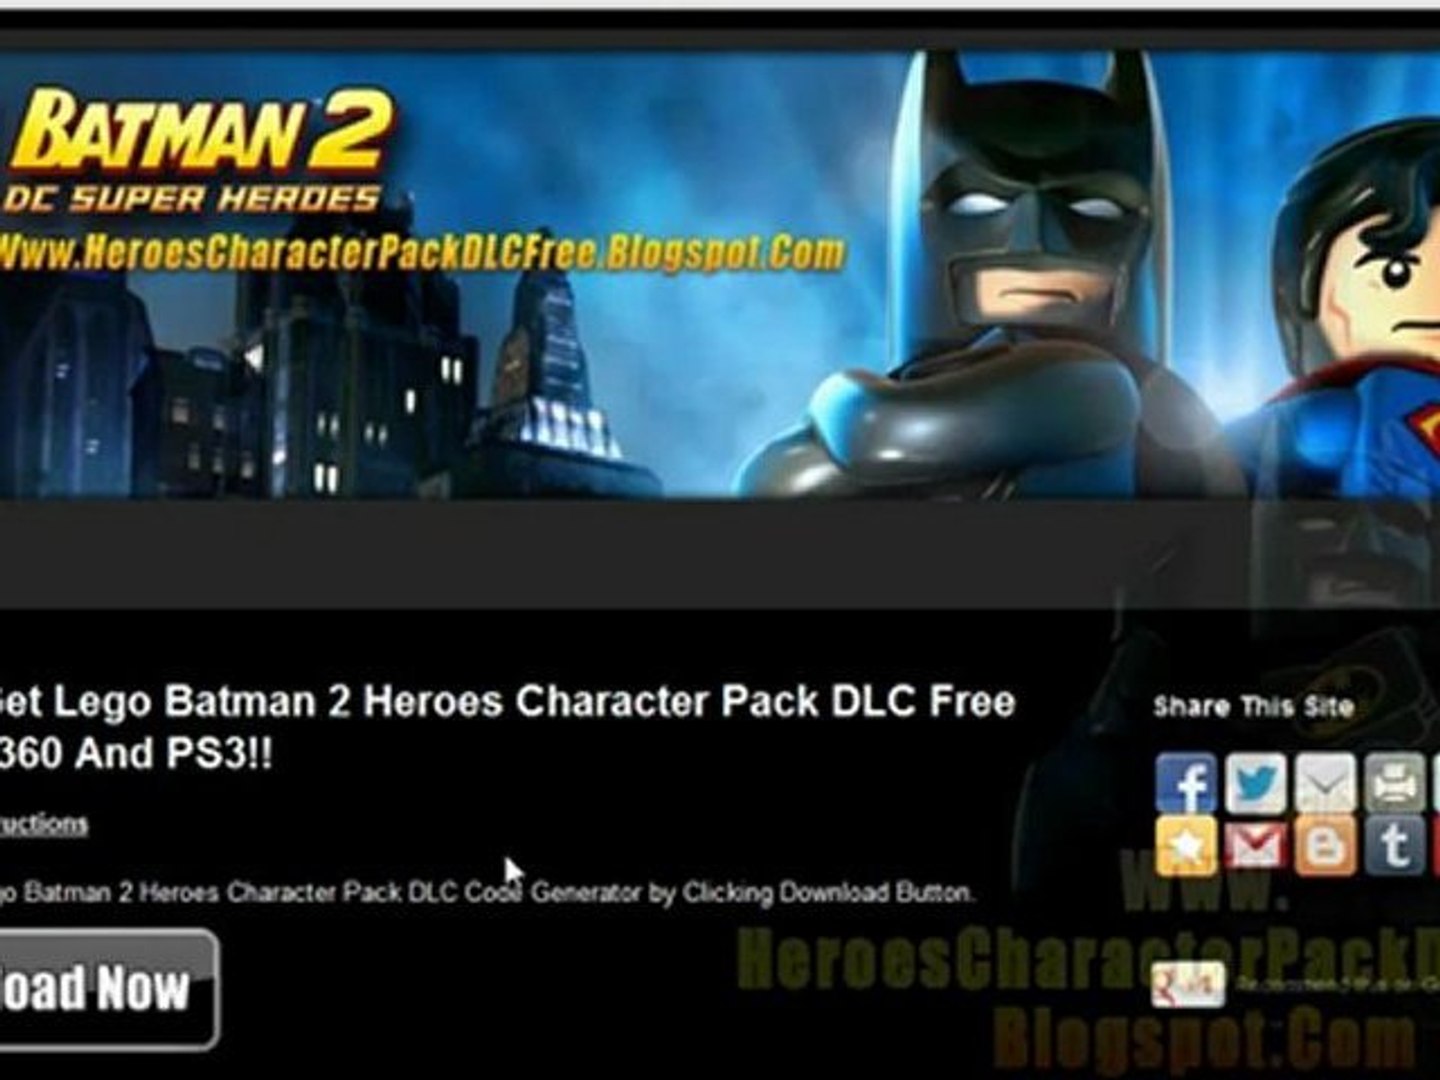 lego batman 2 ps3 torrent for Sale,Up To OFF 68%